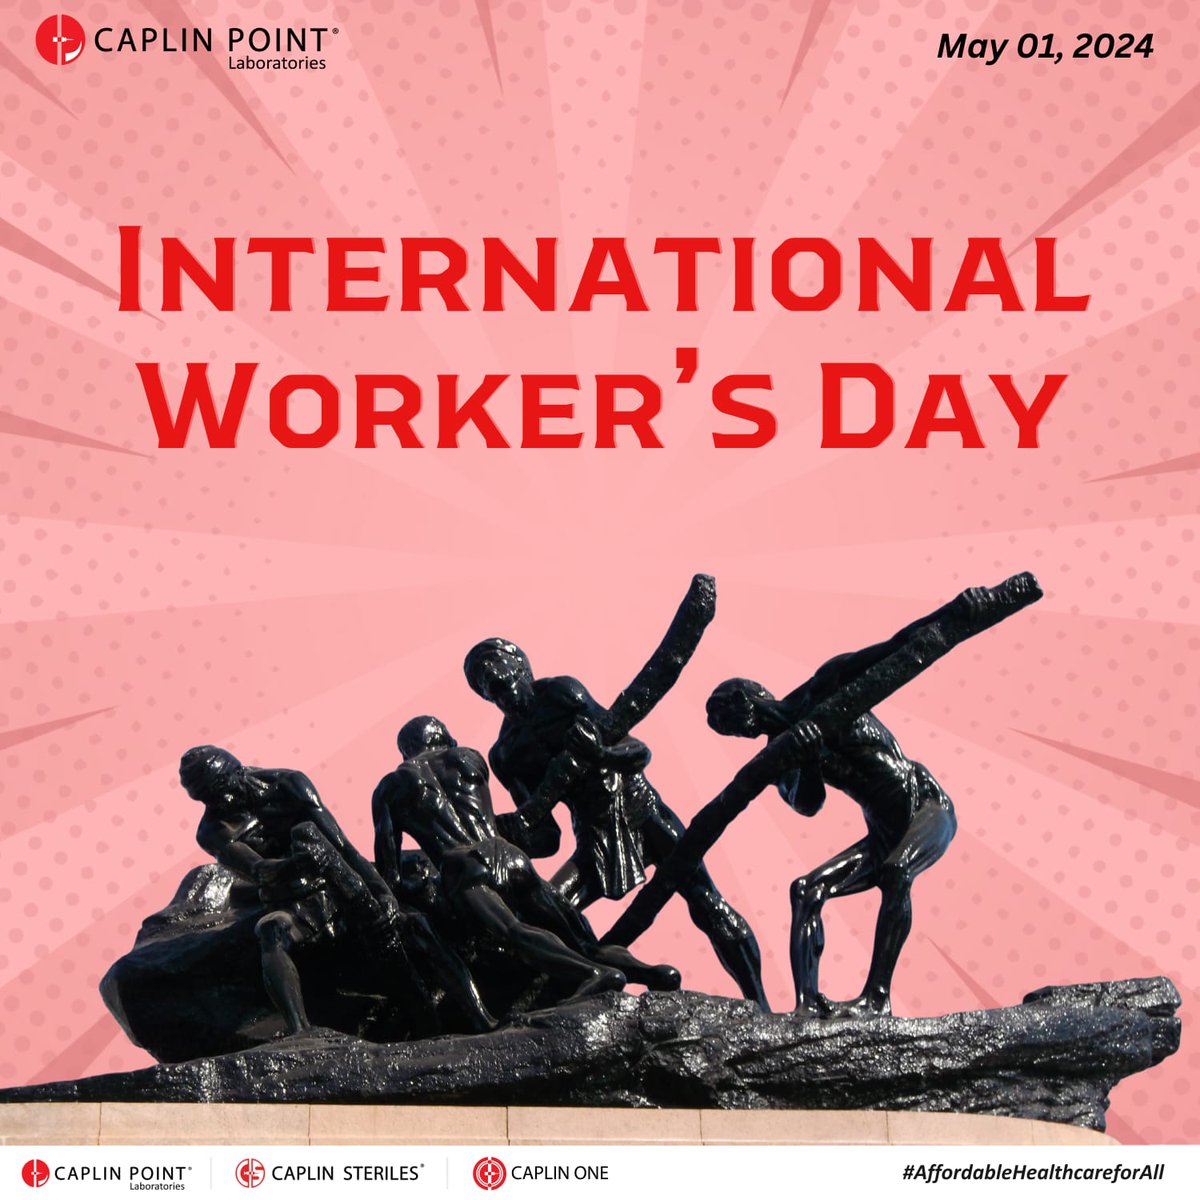 To all the hard-working professionals, your commitment, effort and passion make all the difference. Happy International Worker's Day.

#caplinpointlaboratories #caplinpoint #caplinsteriles #caplinonelabs #caplinone #sterilemanufacturing #pharmamanufacturing #injectables